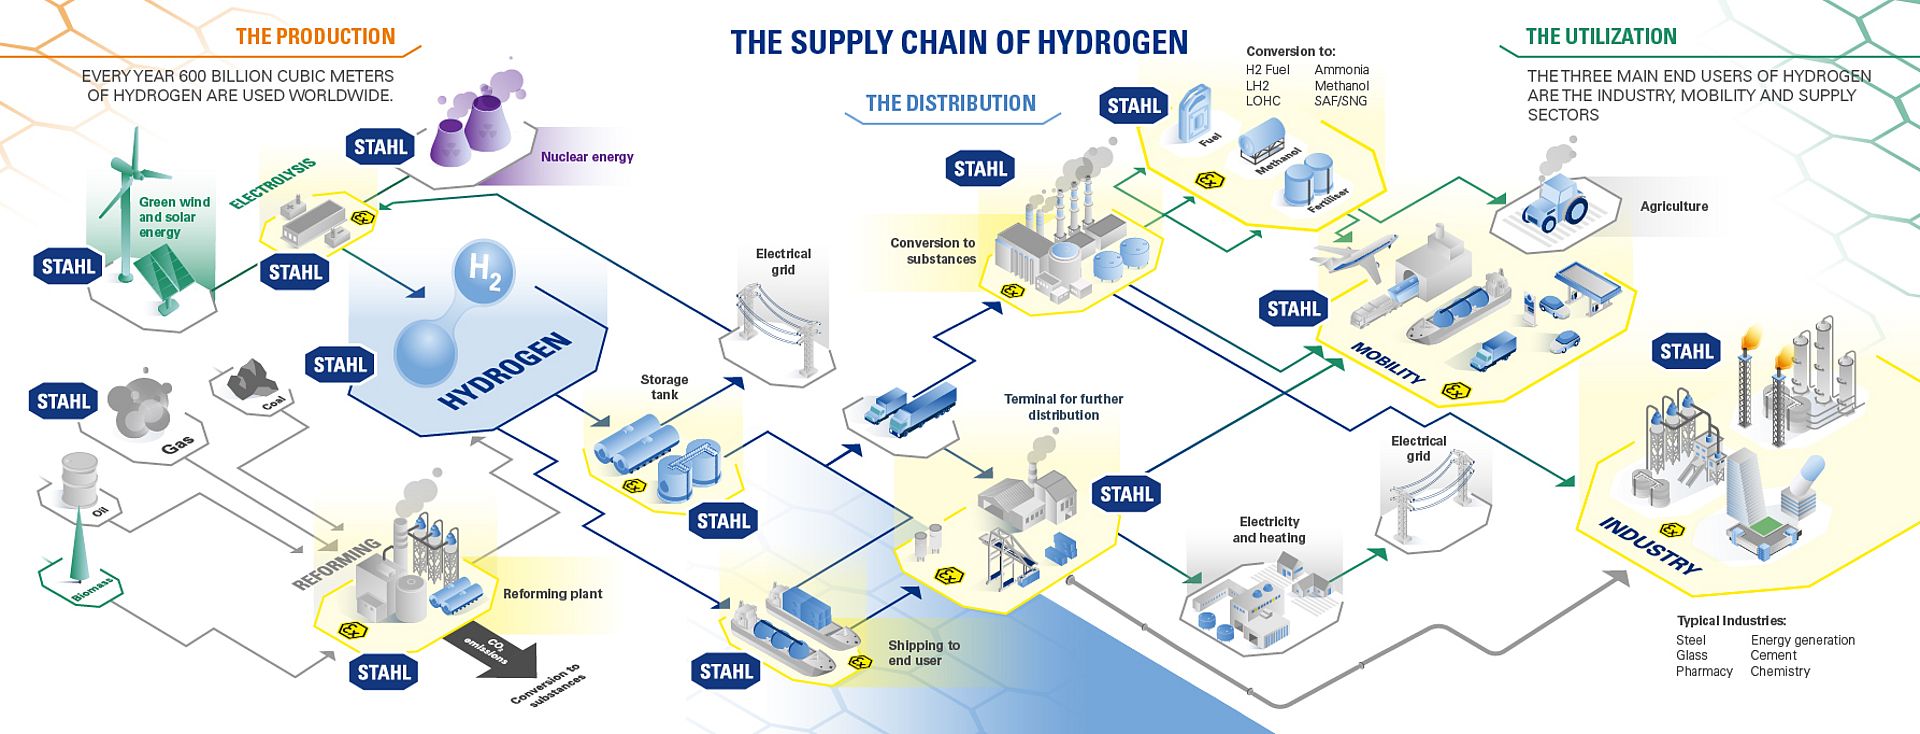 Supply chain of hydrogen - Infographic